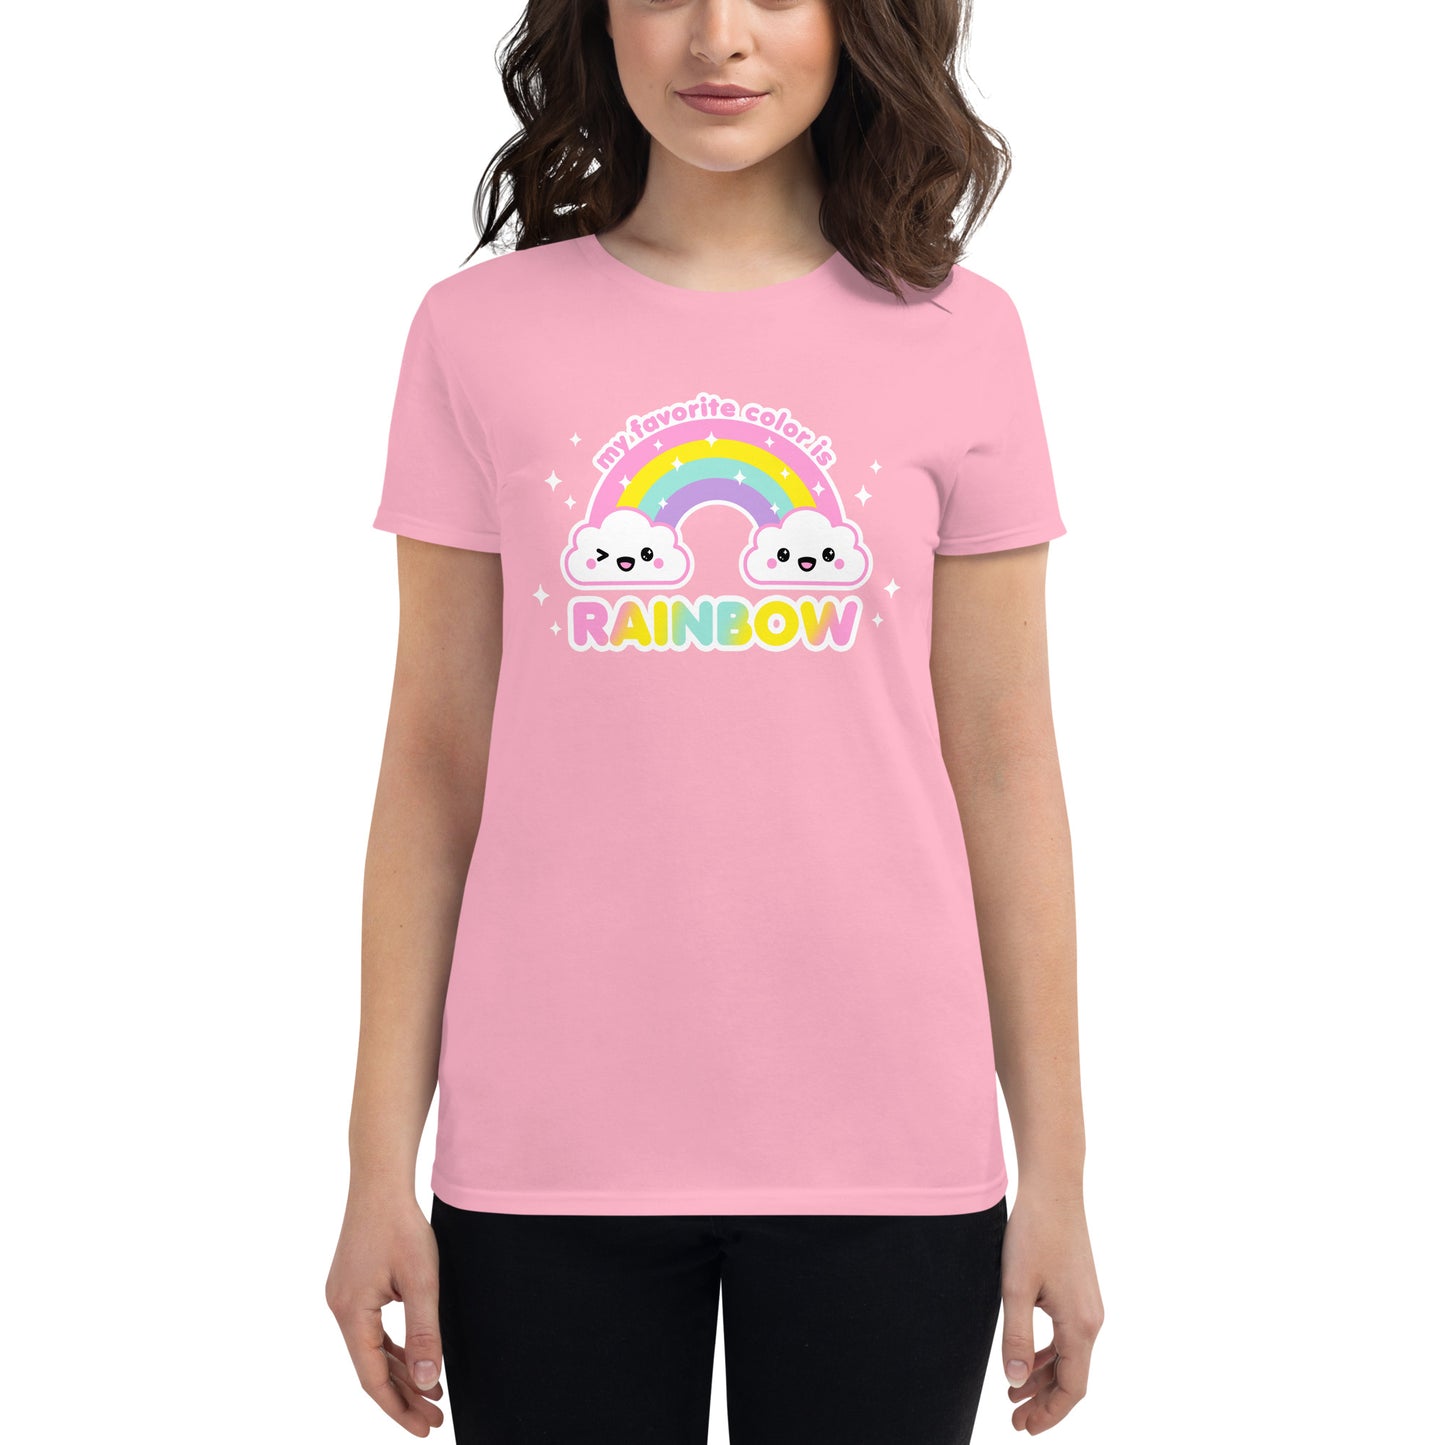 My Favorite Color Is Rainbow Women's T-shirt